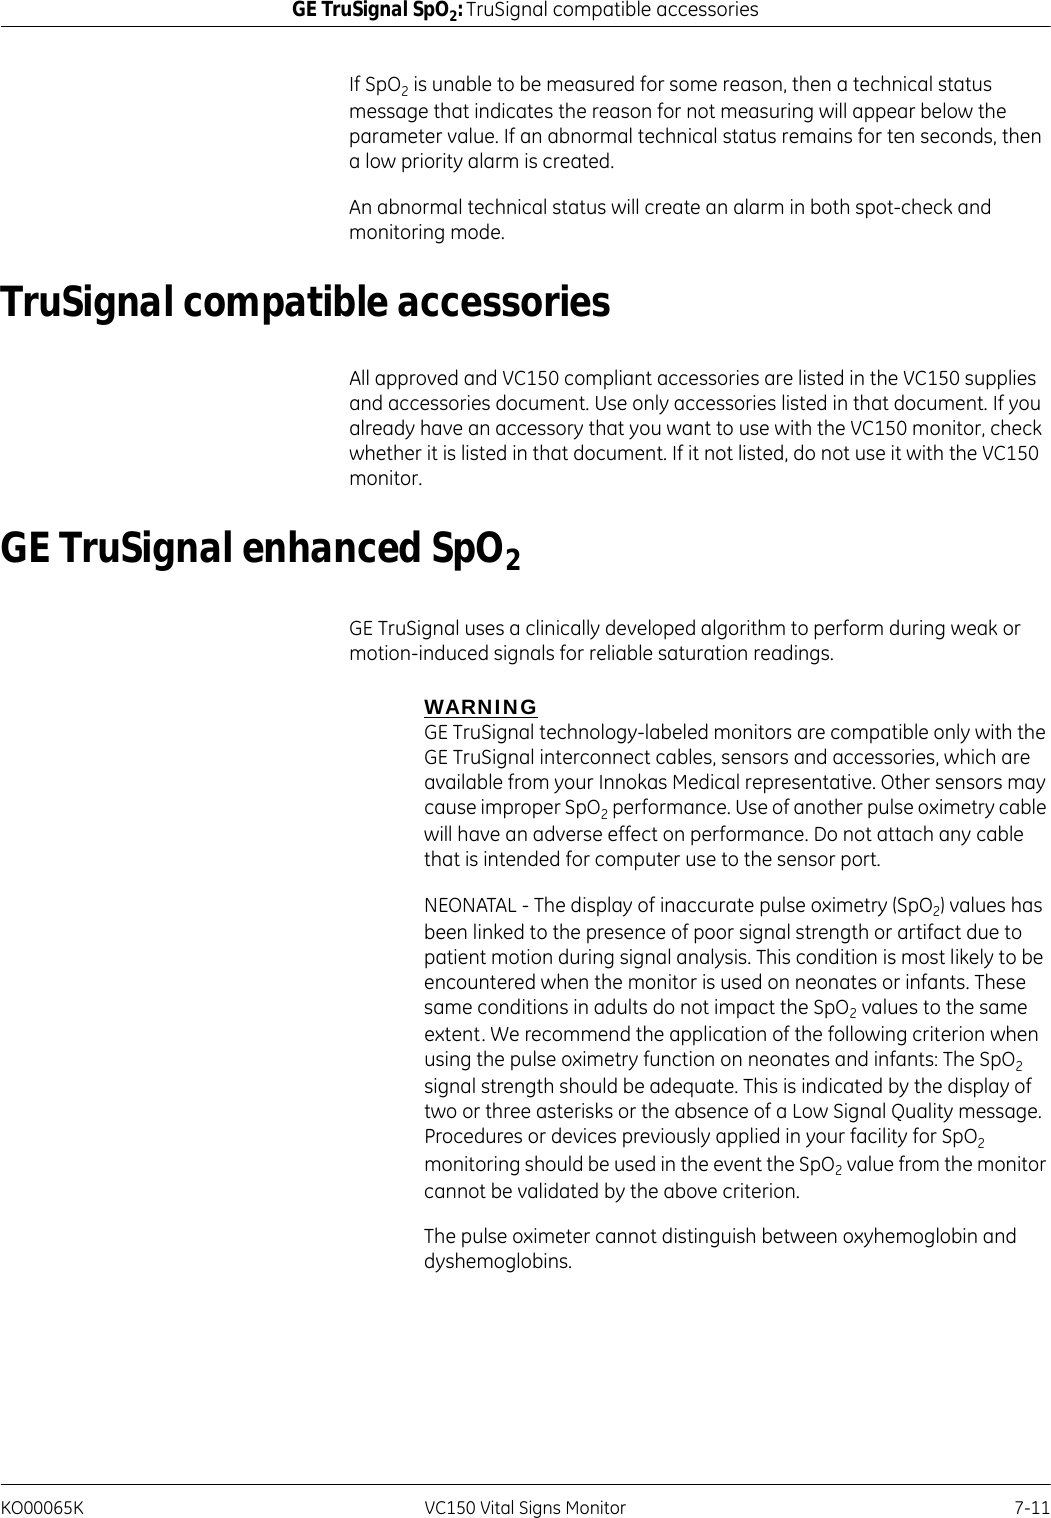 KO00065K VC150 Vital Signs Monitor 7-11GE TruSignal SpO2: TruSignal compatible accessoriesIf SpO2 is unable to be measured for some reason, then a technical status message that indicates the reason for not measuring will appear below the parameter value. If an abnormal technical status remains for ten seconds, then a low priority alarm is created.An abnormal technical status will create an alarm in both spot-check and monitoring mode.TruSignal compatible accessoriesAll approved and VC150 compliant accessories are listed in the VC150 supplies and accessories document. Use only accessories listed in that document. If you already have an accessory that you want to use with the VC150 monitor, check whether it is listed in that document. If it not listed, do not use it with the VC150 monitor.GE TruSignal enhanced SpO2GE TruSignal uses a clinically developed algorithm to perform during weak or motion-induced signals for reliable saturation readings.WARNINGGE TruSignal technology-labeled monitors are compatible only with the GE TruSignal interconnect cables, sensors and accessories, which are available from your Innokas Medical representative. Other sensors may cause improper SpO2 performance. Use of another pulse oximetry cable will have an adverse effect on performance. Do not attach any cable that is intended for computer use to the sensor port.NEONATAL - The display of inaccurate pulse oximetry (SpO2) values has been linked to the presence of poor signal strength or artifact due to patient motion during signal analysis. This condition is most likely to be encountered when the monitor is used on neonates or infants. These same conditions in adults do not impact the SpO2 values to the same extent. We recommend the application of the following criterion when using the pulse oximetry function on neonates and infants: The SpO2 signal strength should be adequate. This is indicated by the display of two or three asterisks or the absence of a Low Signal Quality message. Procedures or devices previously applied in your facility for SpO2 monitoring should be used in the event the SpO2 value from the monitor cannot be validated by the above criterion.The pulse oximeter cannot distinguish between oxyhemoglobin and dyshemoglobins.